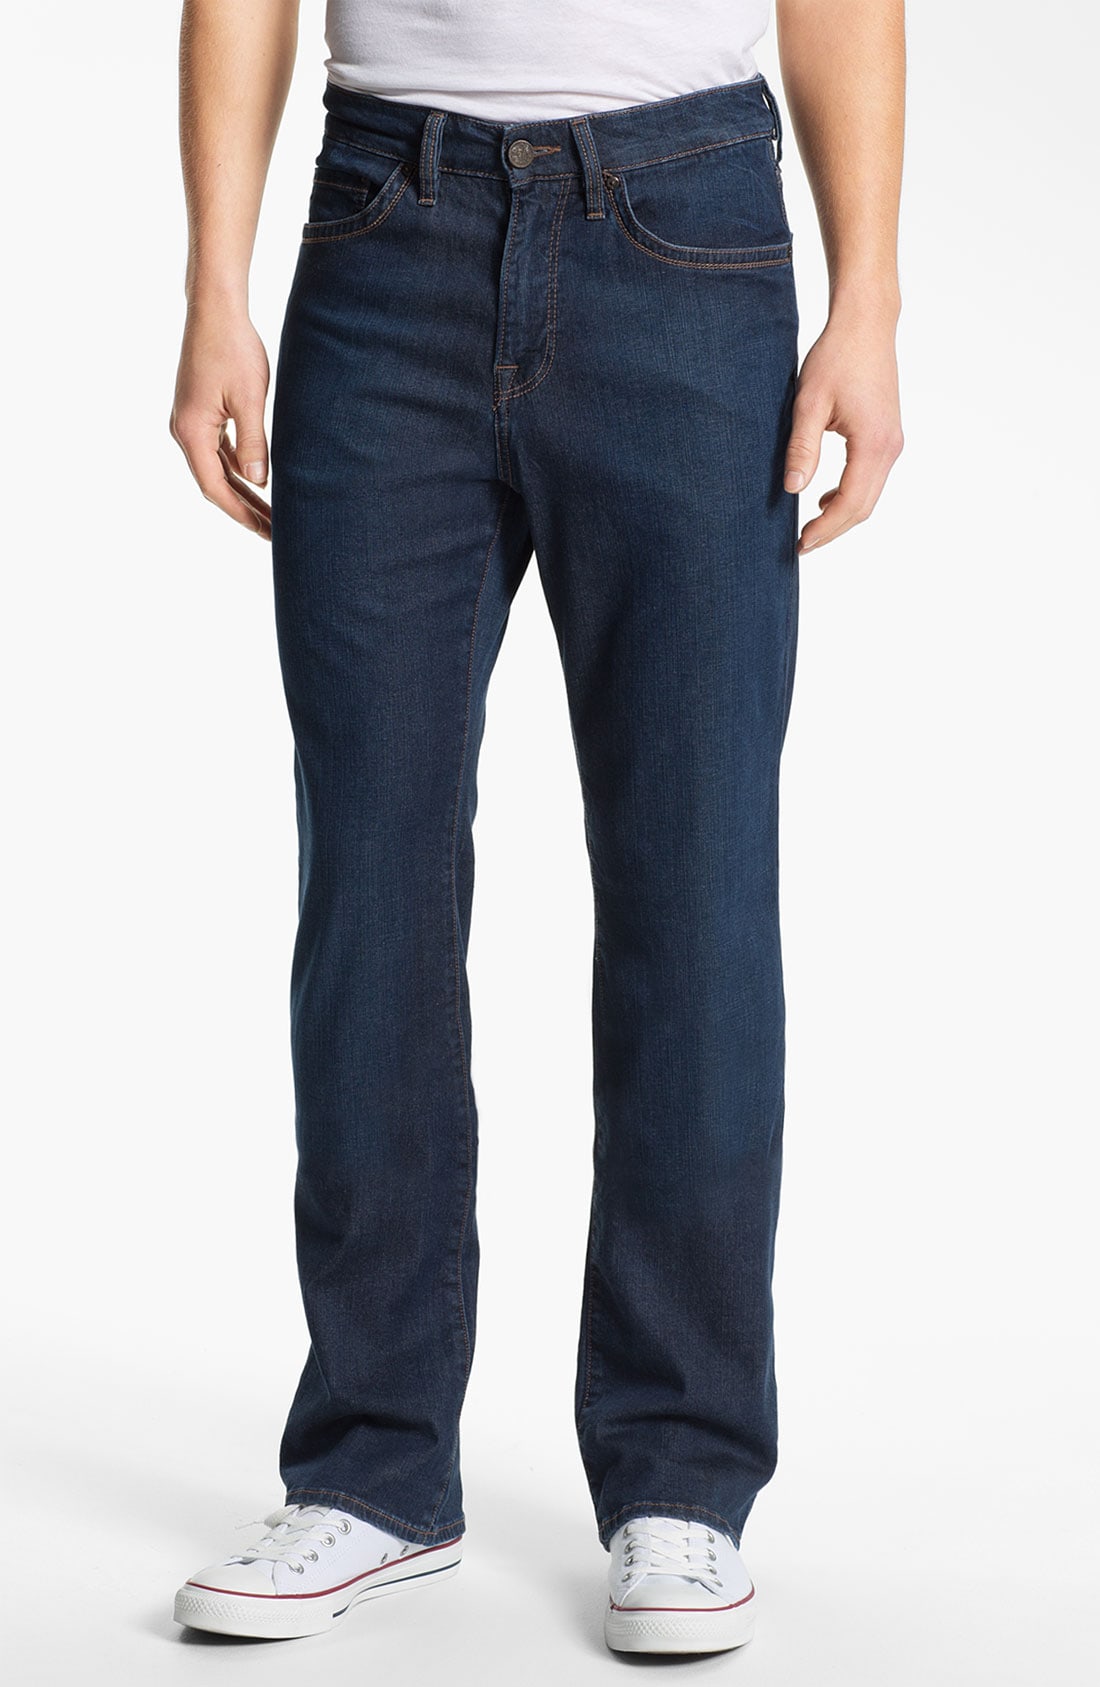 34 Heritage 'Charisma' Classic Relaxed Fit Jeans (Dark Cashmere) (Online Only) (Regular & Tall)